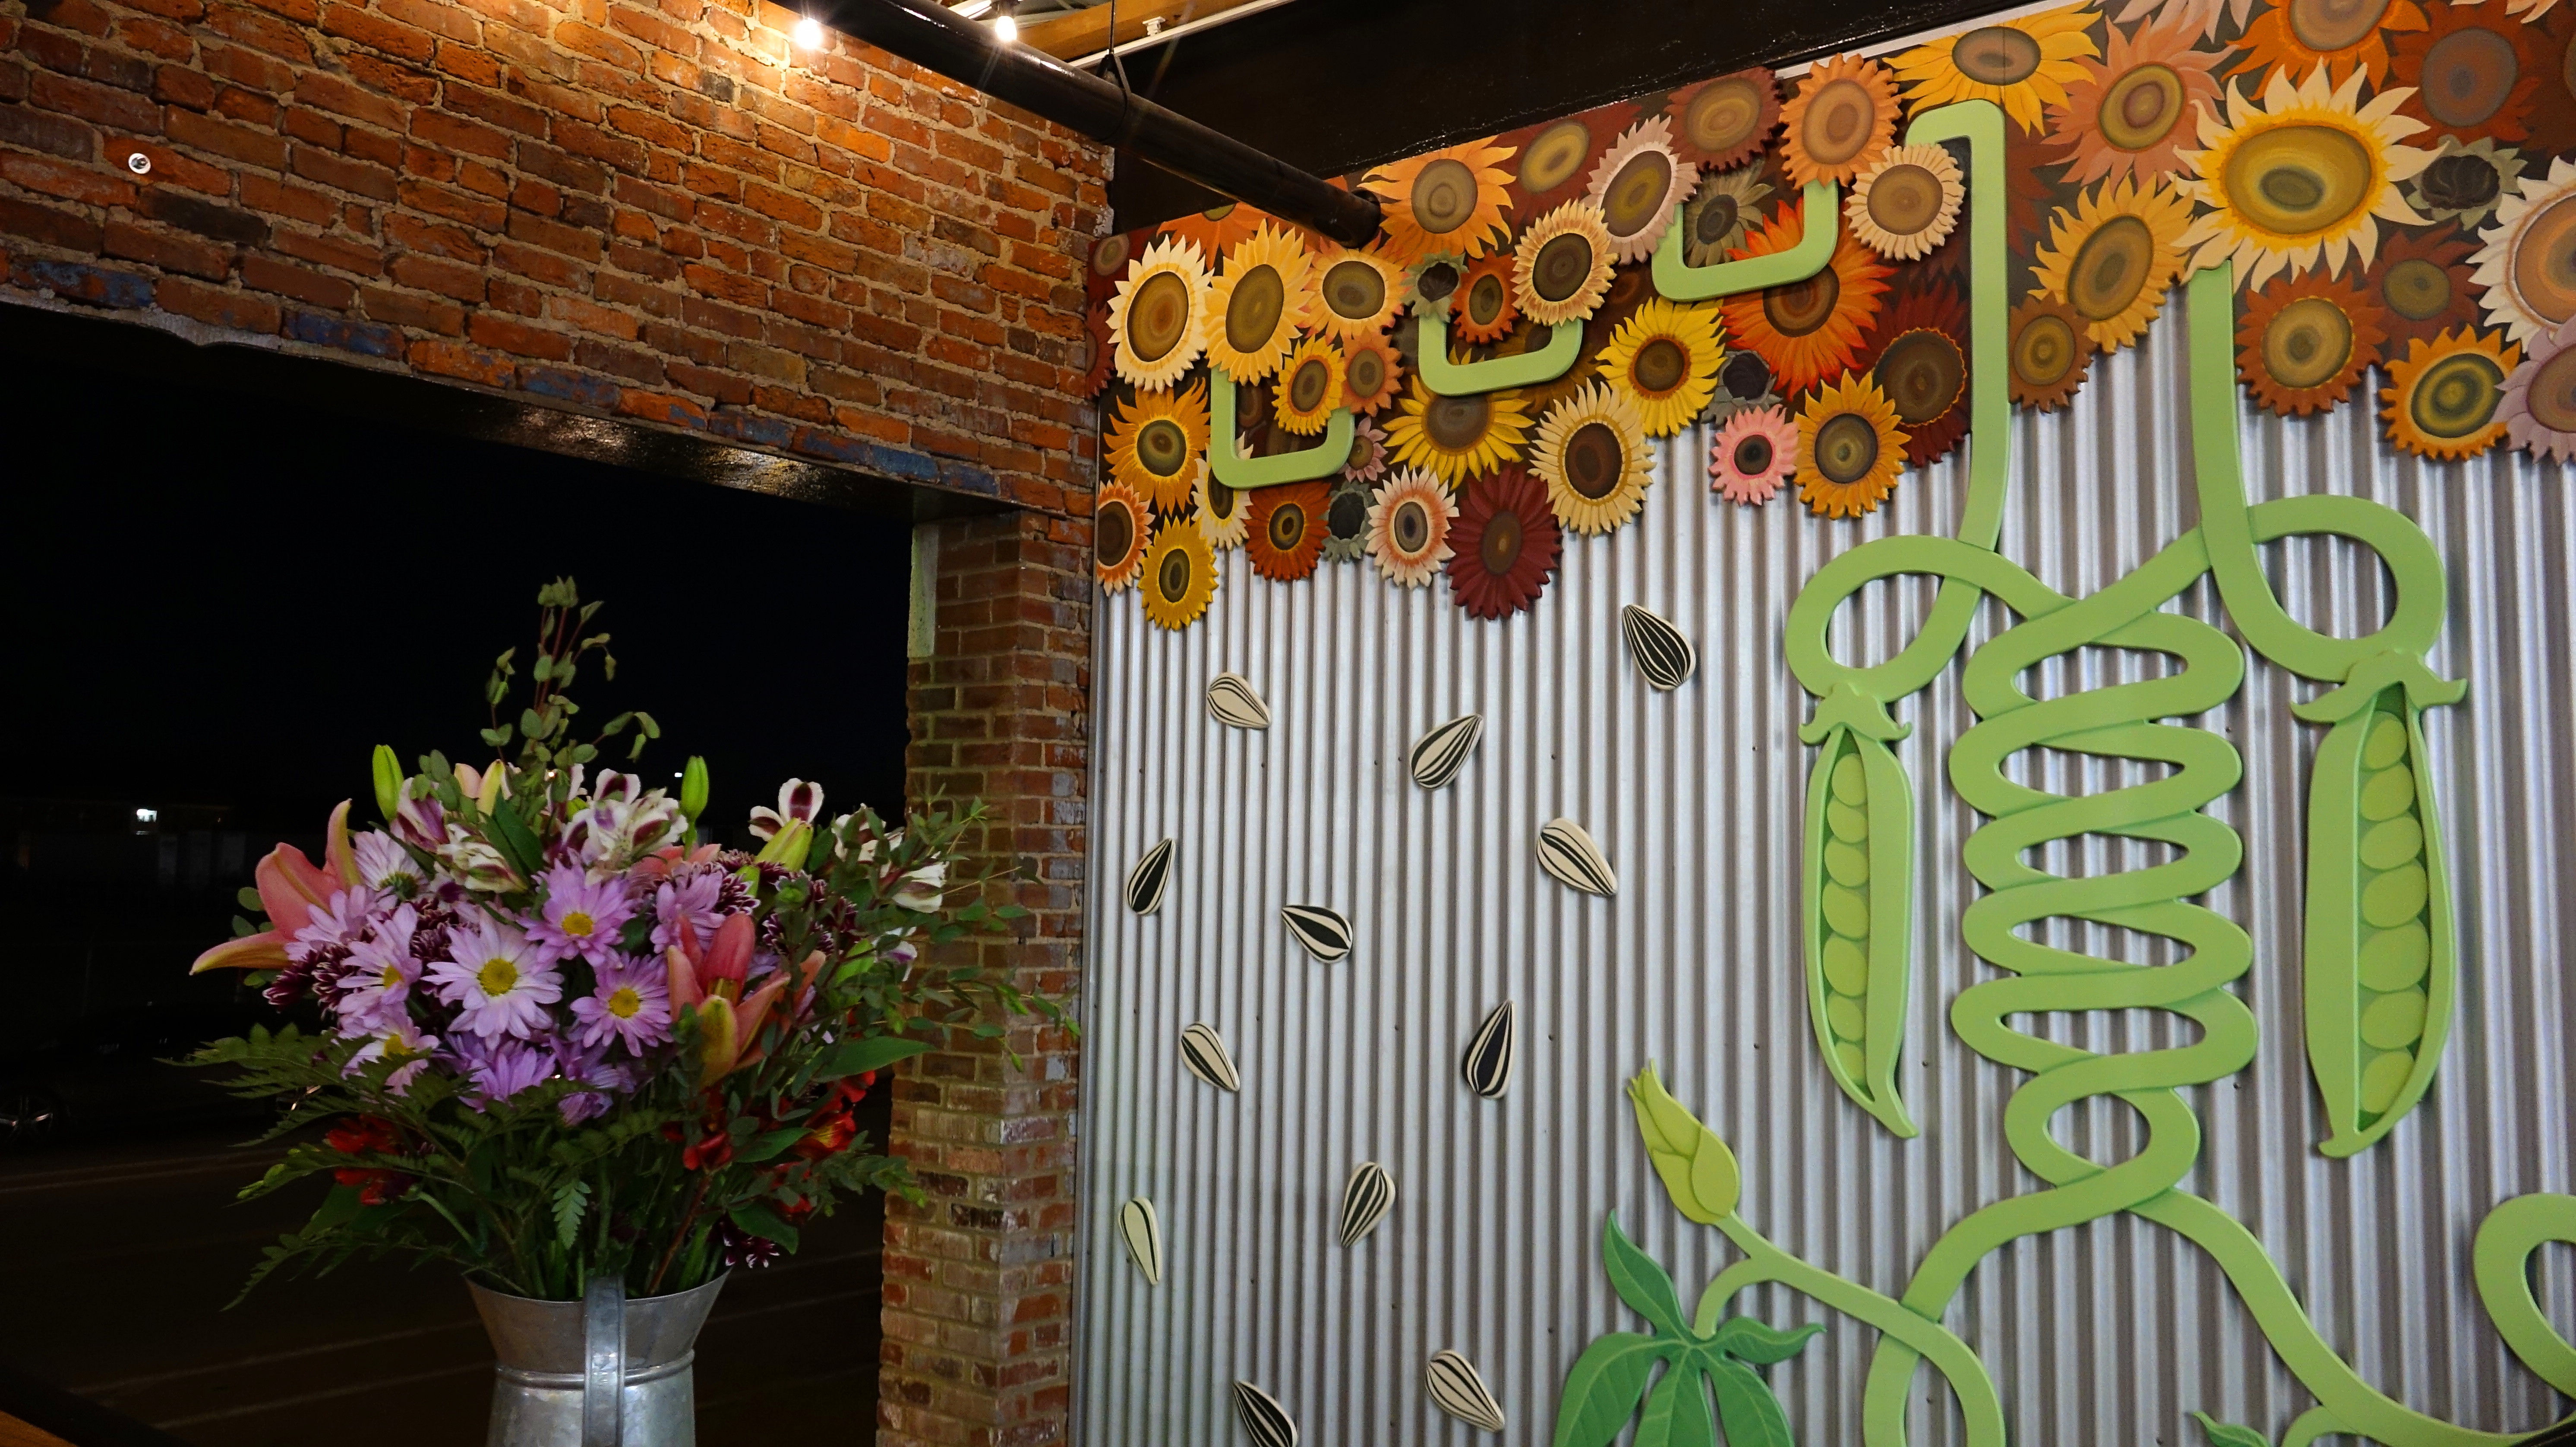 Emily C. Thomas, Virtual Studio Visit, August 2022: A pipe from the building runs through the sunflower panel, linking the wall mural to the surrounding architecture.